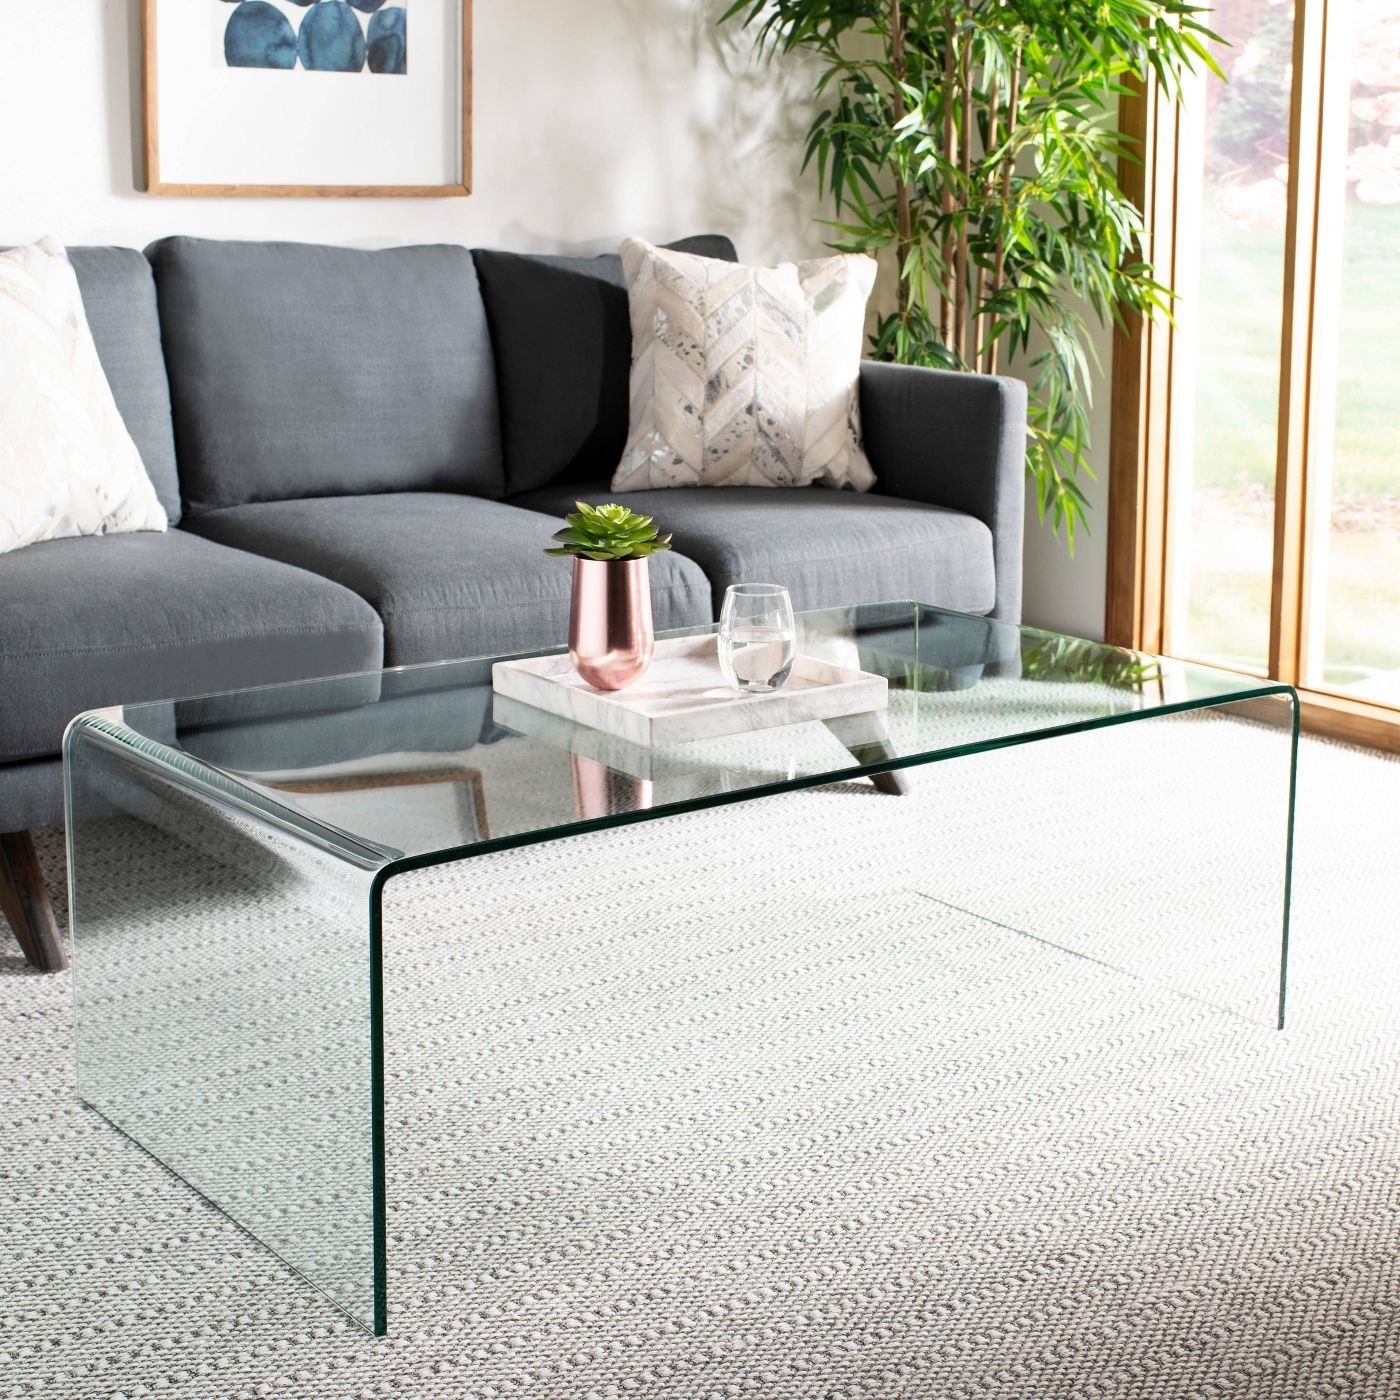 Glass coffee table in a modern living room.